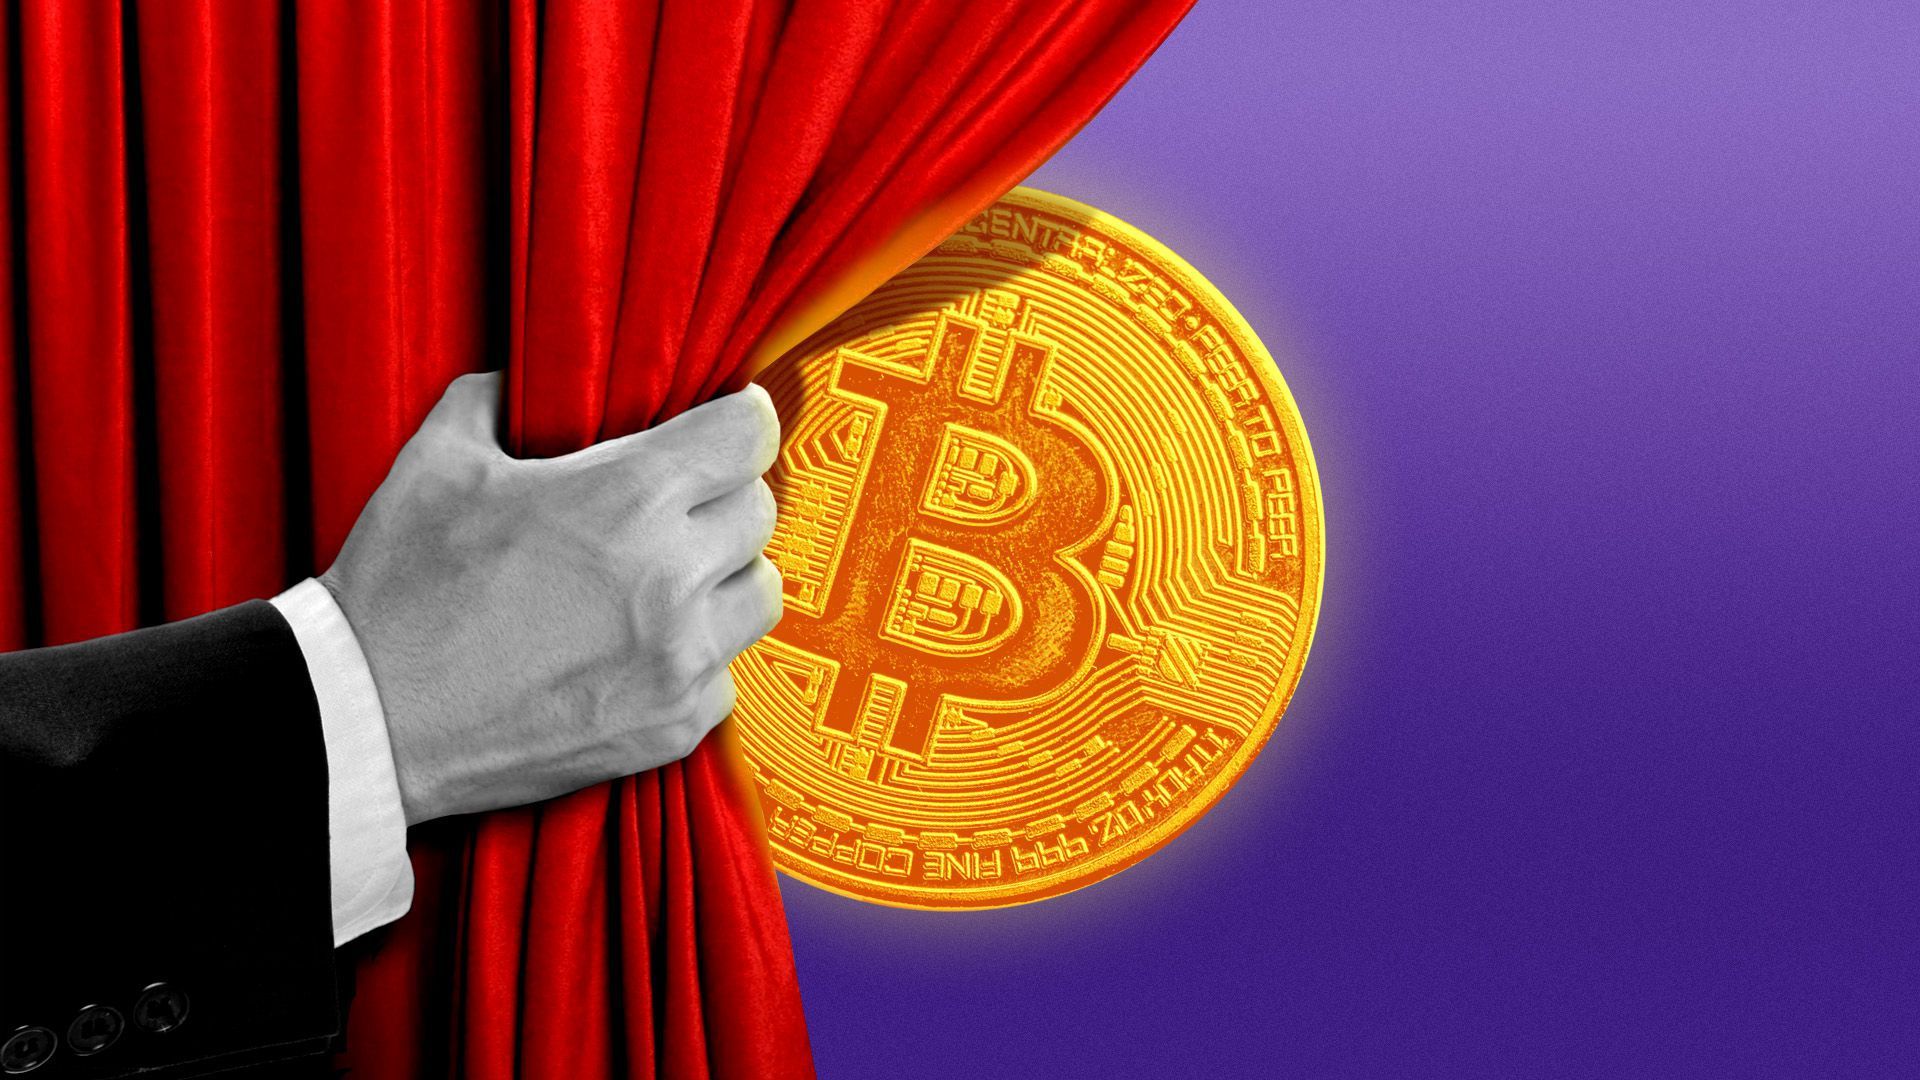 A bitcoin being unveiled behind a curtain